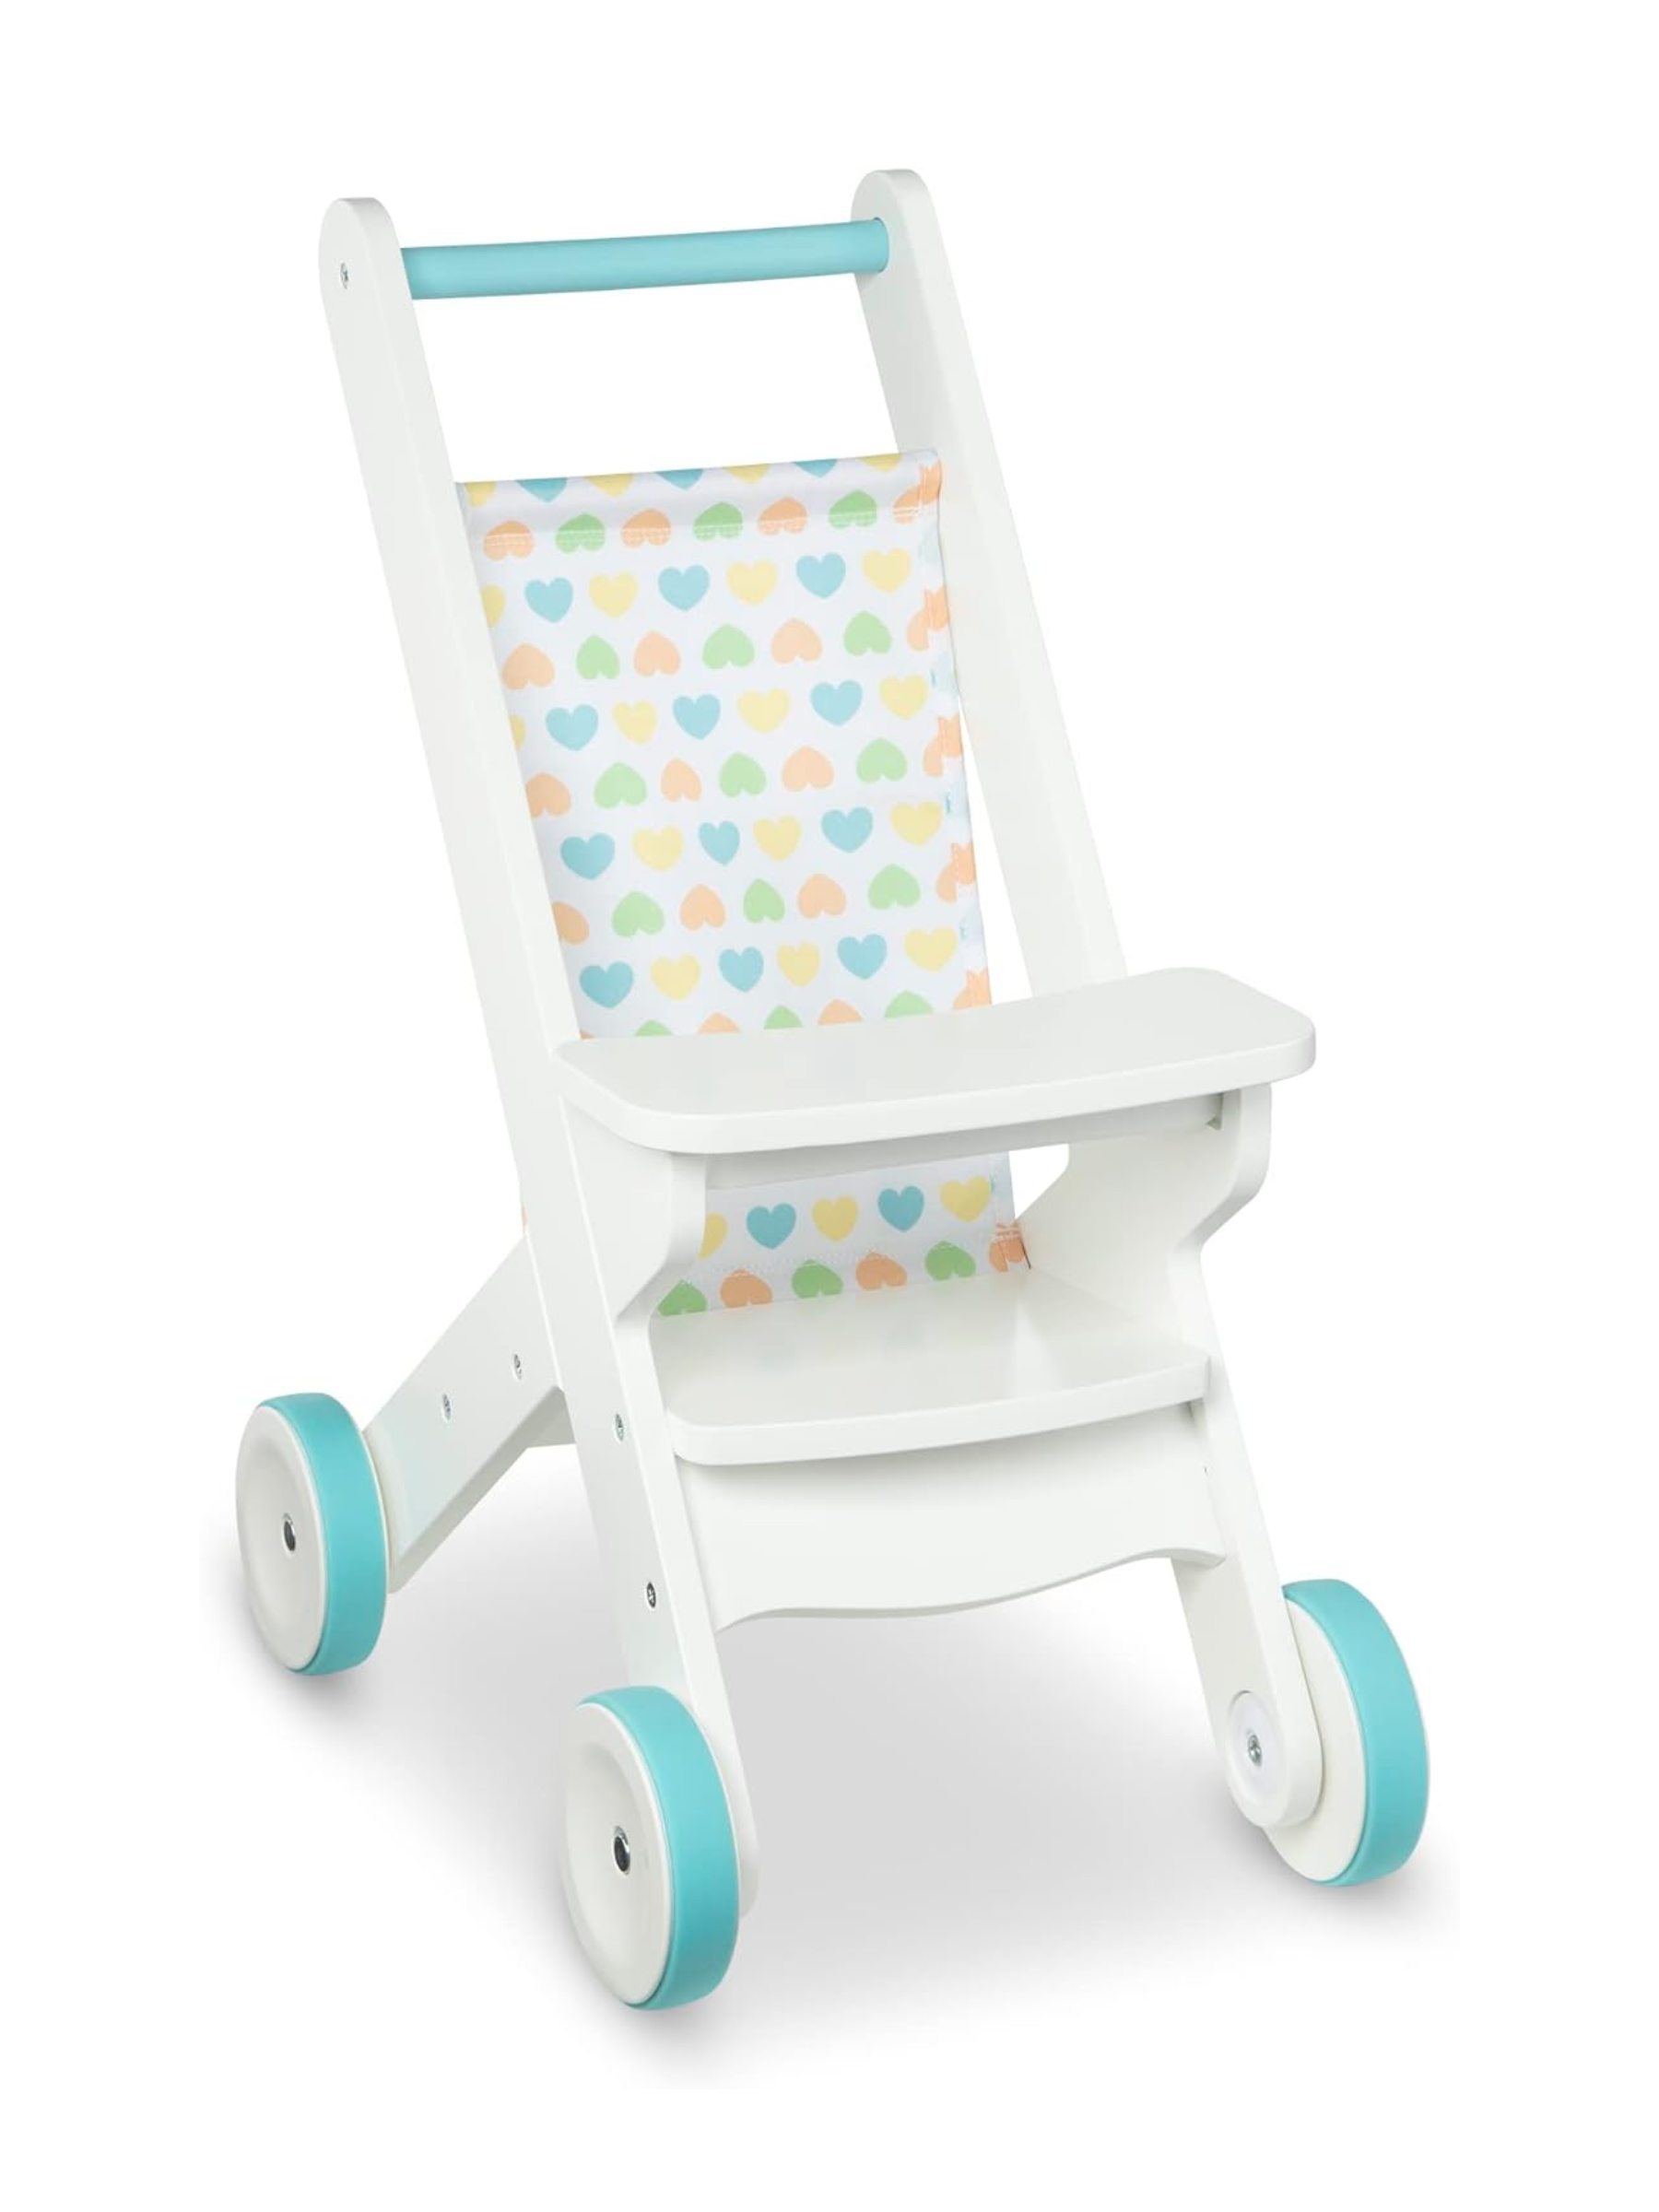 <p>Toddlers love pretend play, especially when they are mimicking things they see every day. Bonus: the stroller can work first as a walking support for little ones taking their first steps.</p> <p><strong>What our expert says:</strong> My daughter’s play stroller is not just her favorite toy; it’s every toddler on the playground’s favorite. Seriously—when she brings it to the park, children follow her around with big eyes begging to play with it. <em>-SM</em></p> $58, Amazon. <a href="https://www.amazon.com/dp/B09VCNKZ8R/ref=sspa_dk_detail_3?">Get it now!</a><p>Sign up for today’s biggest stories, from pop culture to politics.</p><a href="https://www.glamour.com/newsletter/news?sourceCode=msnsend">Sign Up</a>